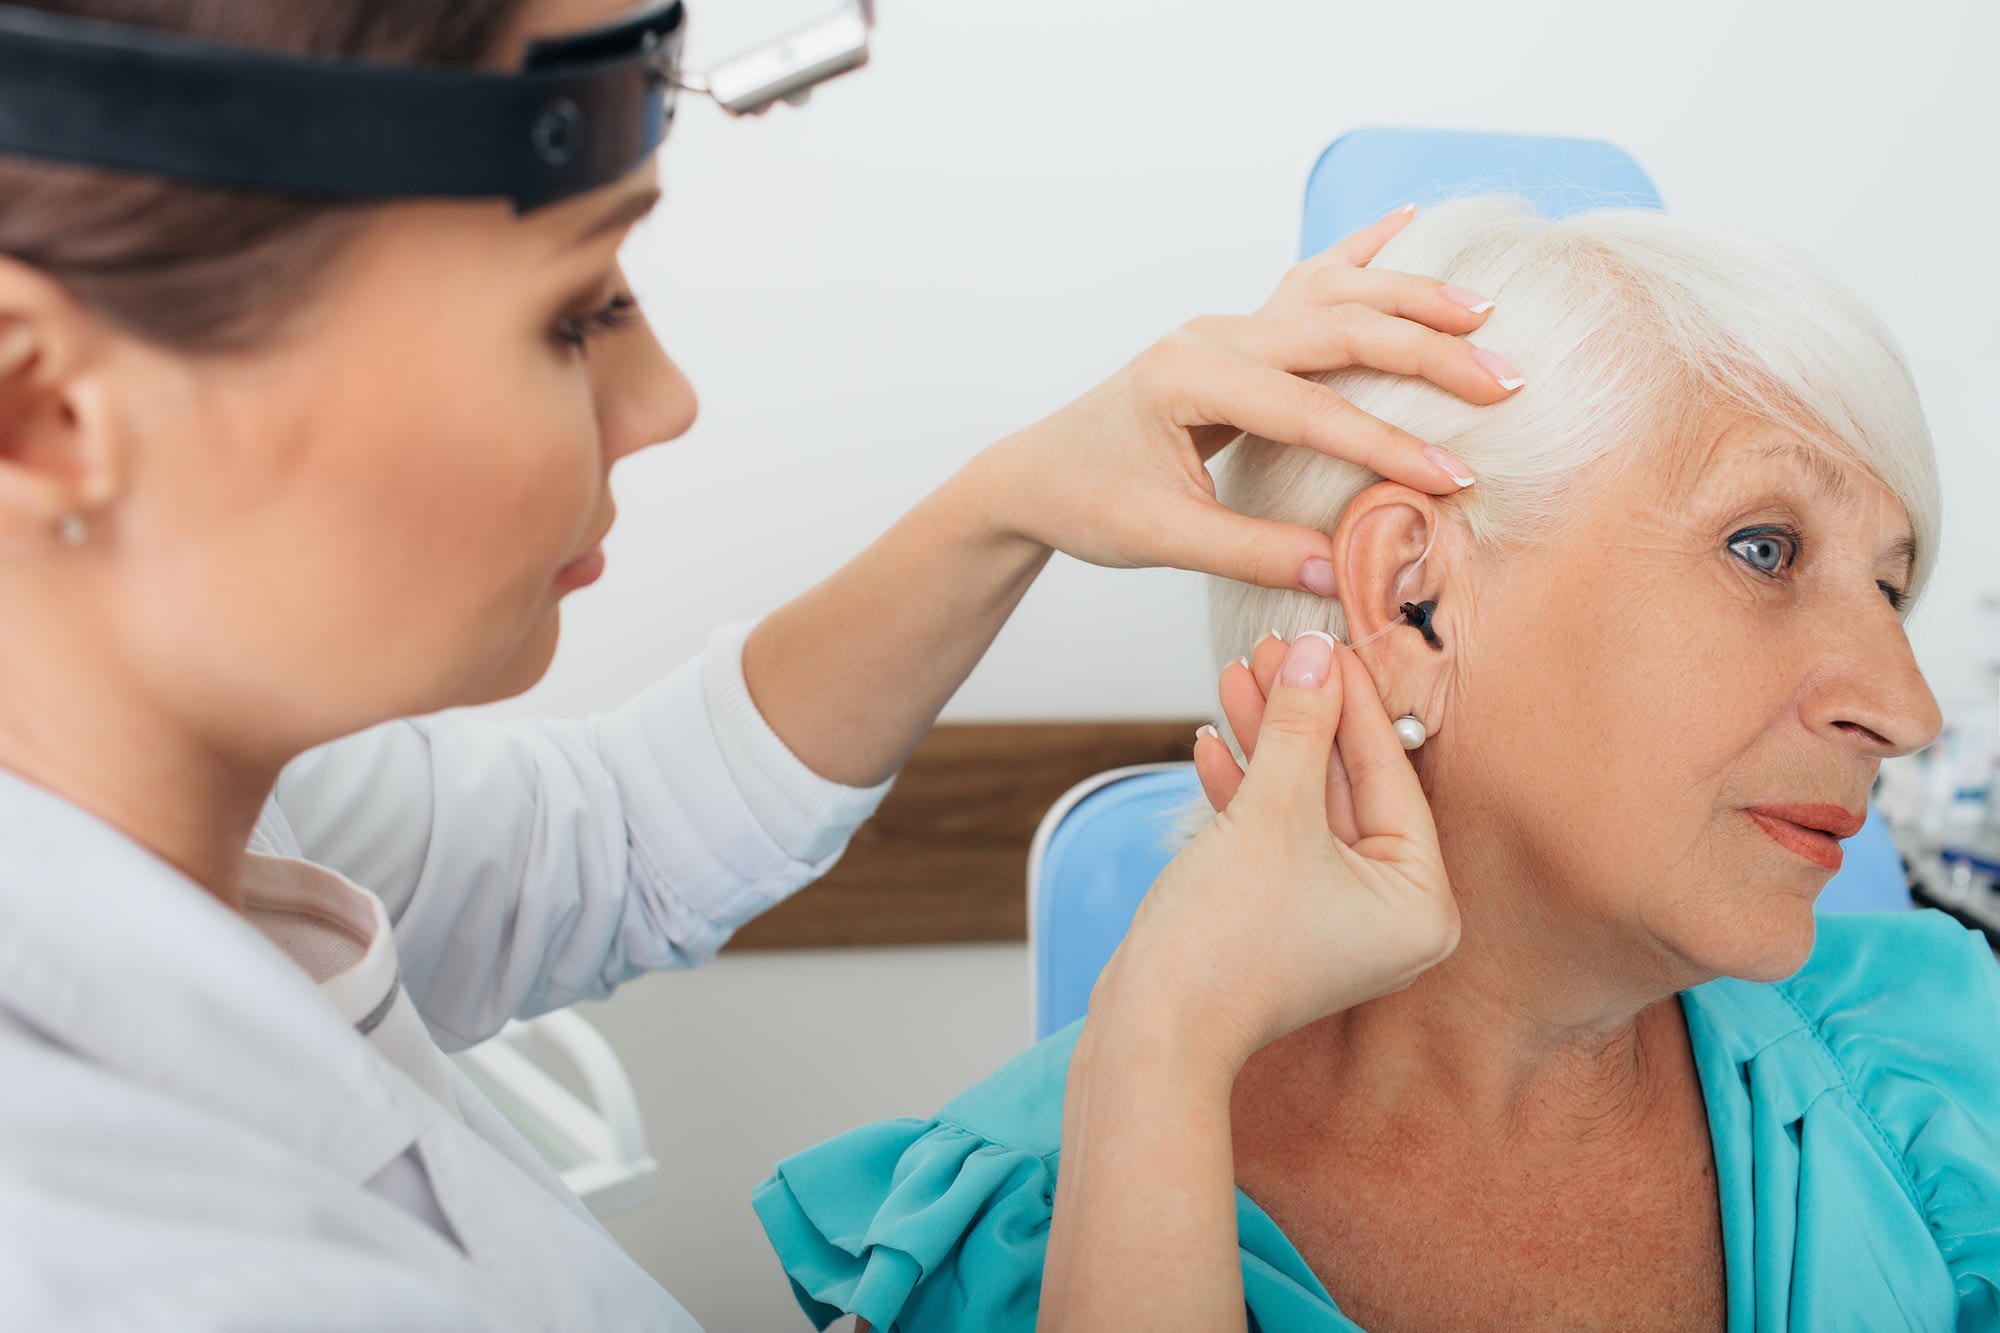 doctor fitting a hearing aid for patient